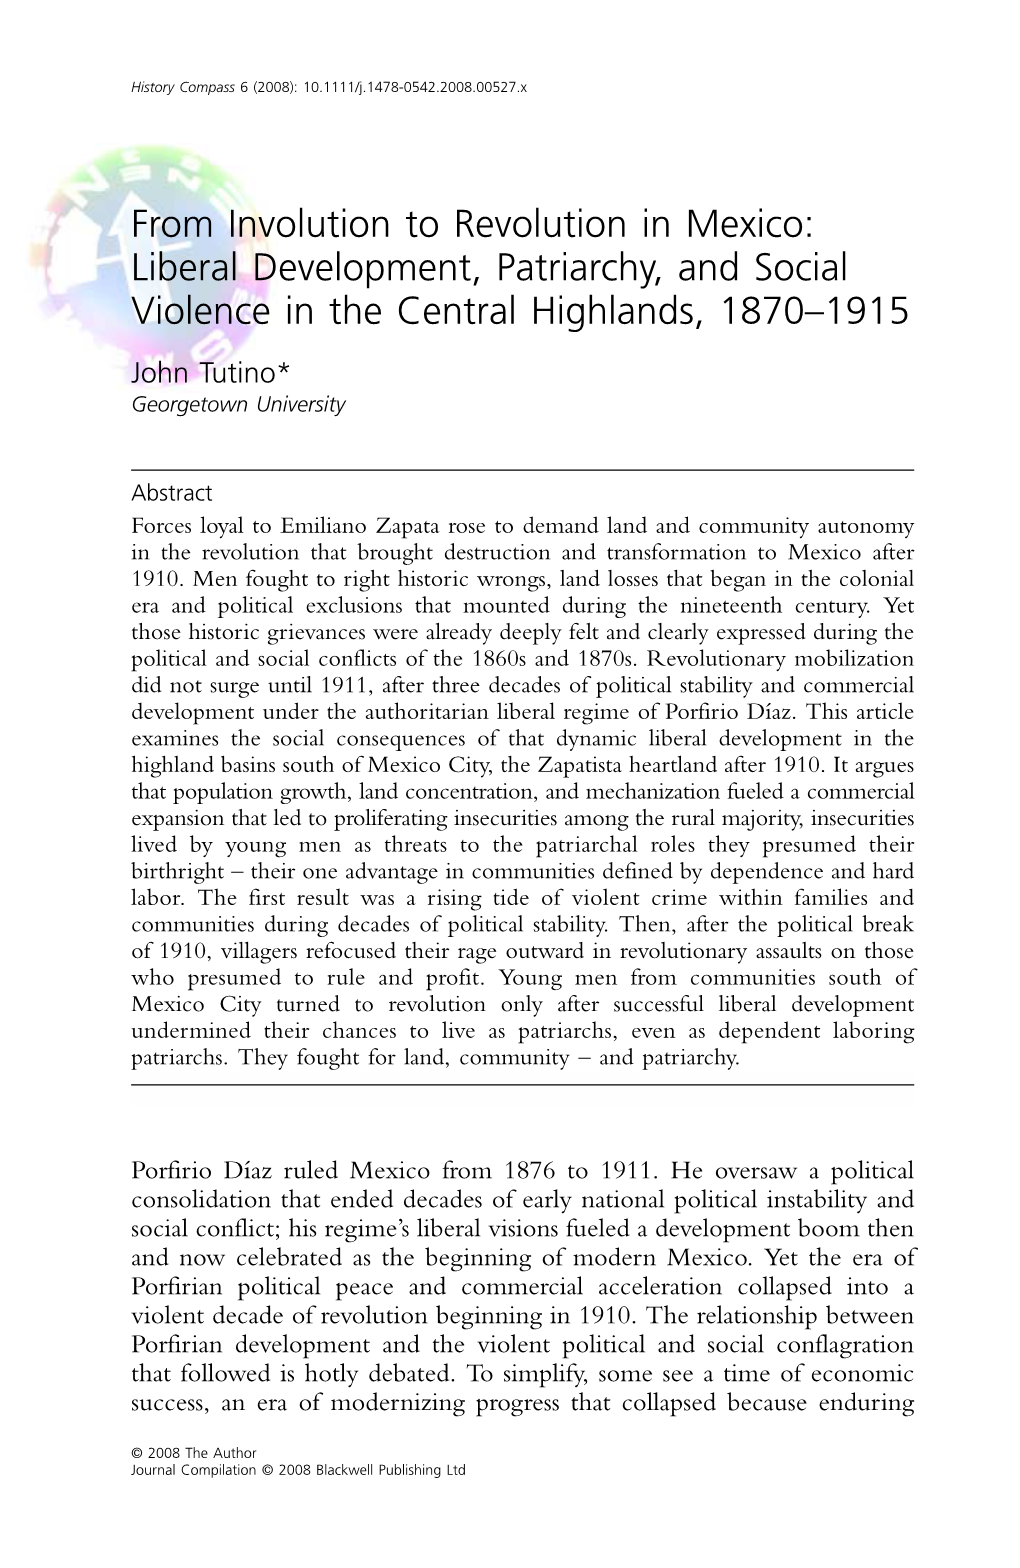 From Involution to Revolution in Mexico: Liberal Development, Patriarchy, and Social Violence in the Central Highlands, 1870–1915 John Tutino* Georgetown University